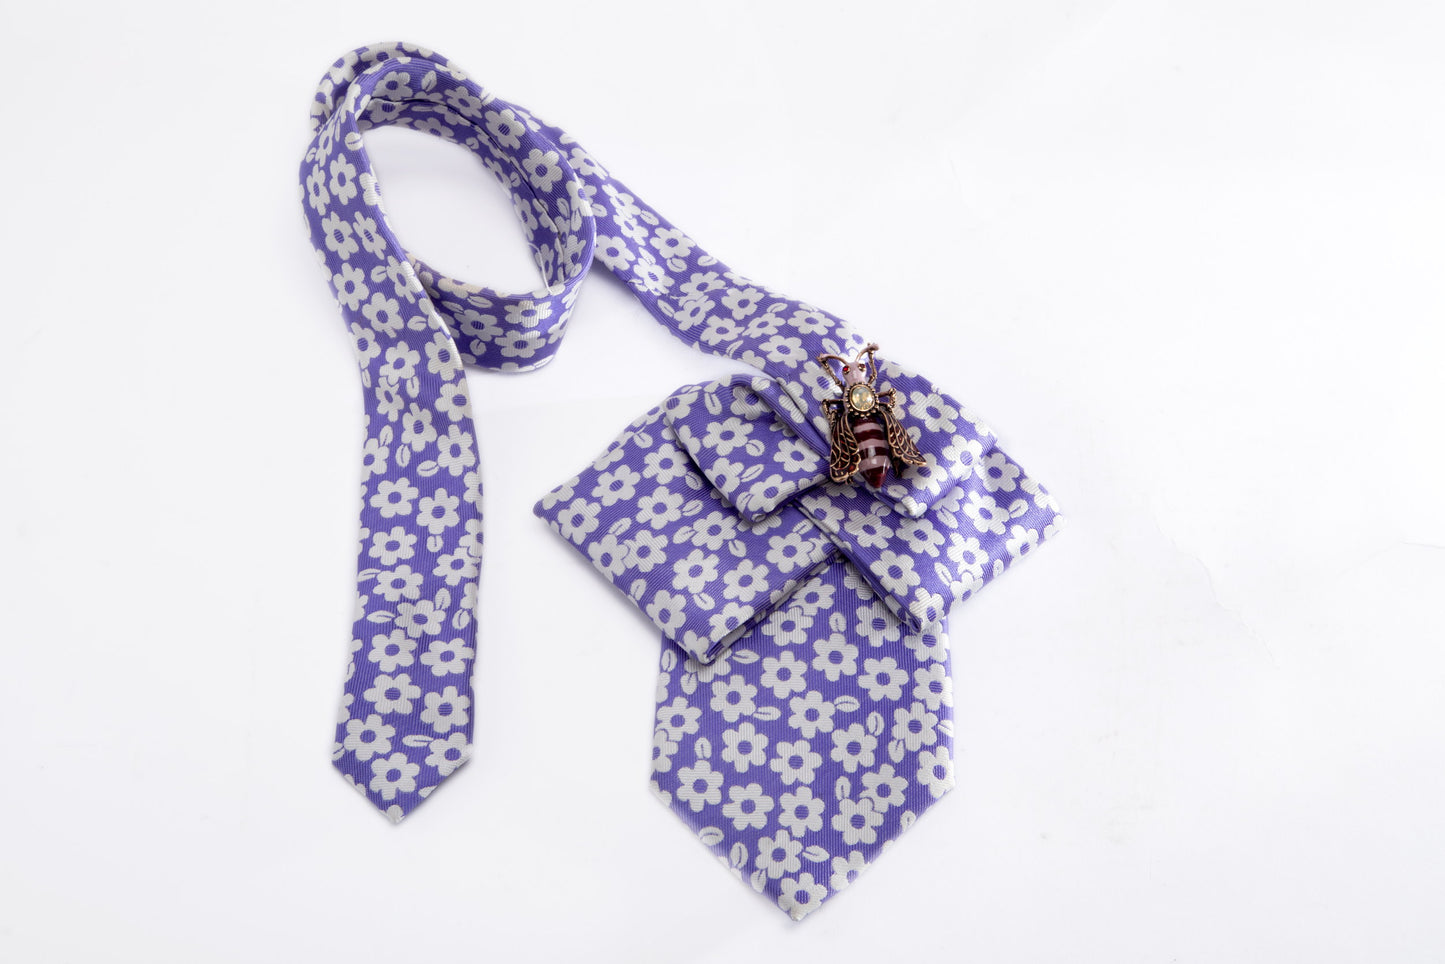 Lilac silk tie scarf with white flowers